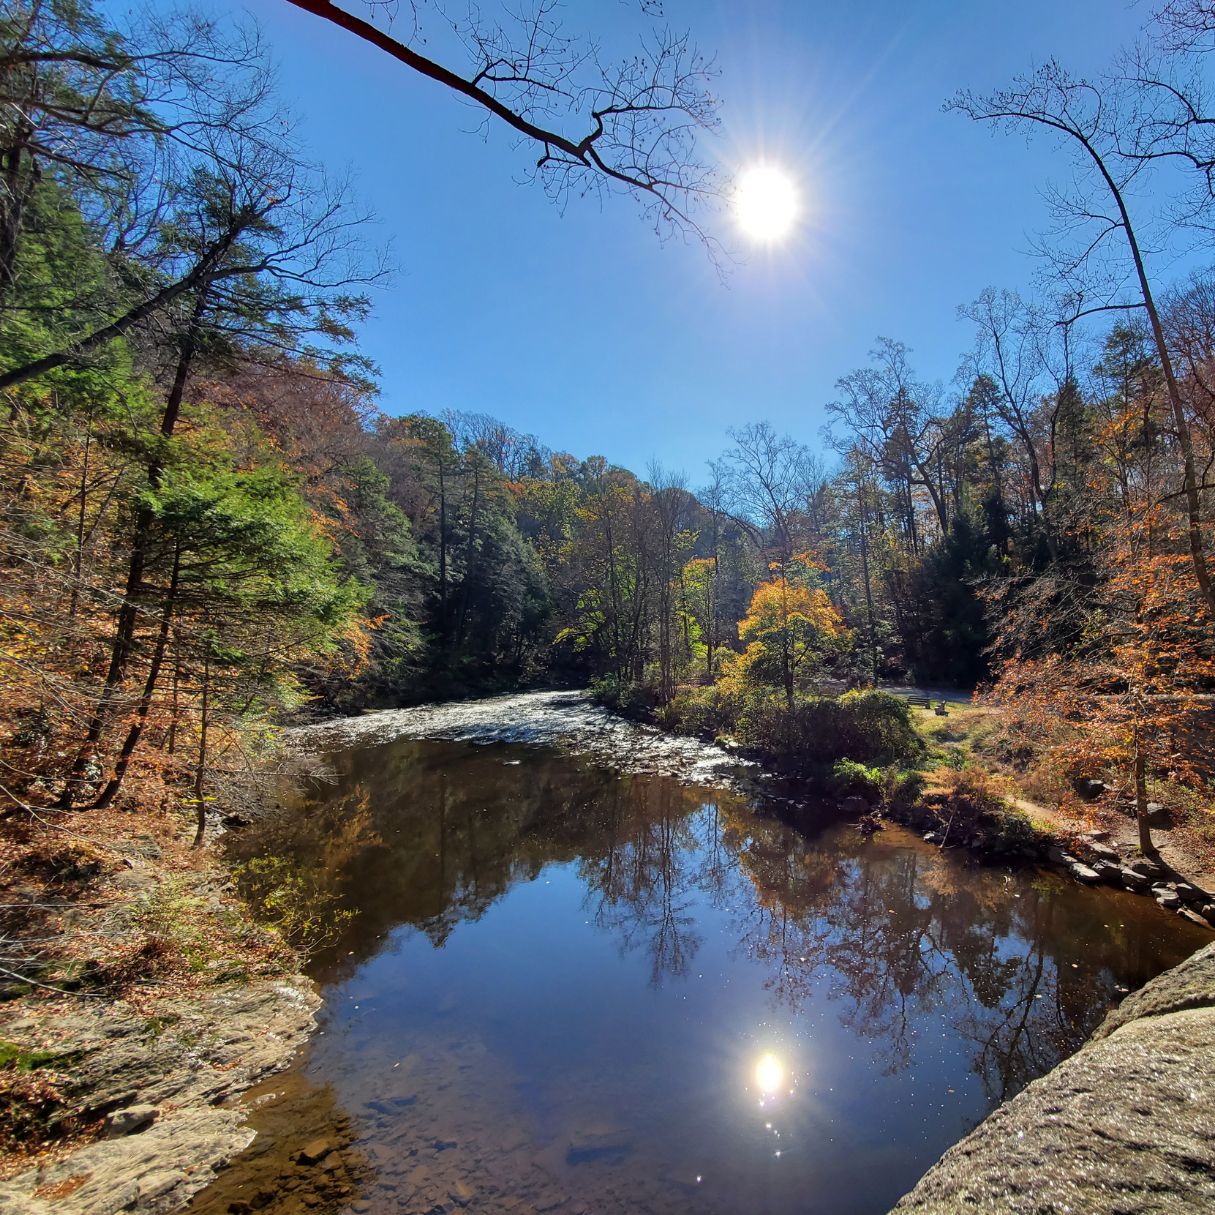 The sun over the water at Wissahickon Valley Park in autumn 